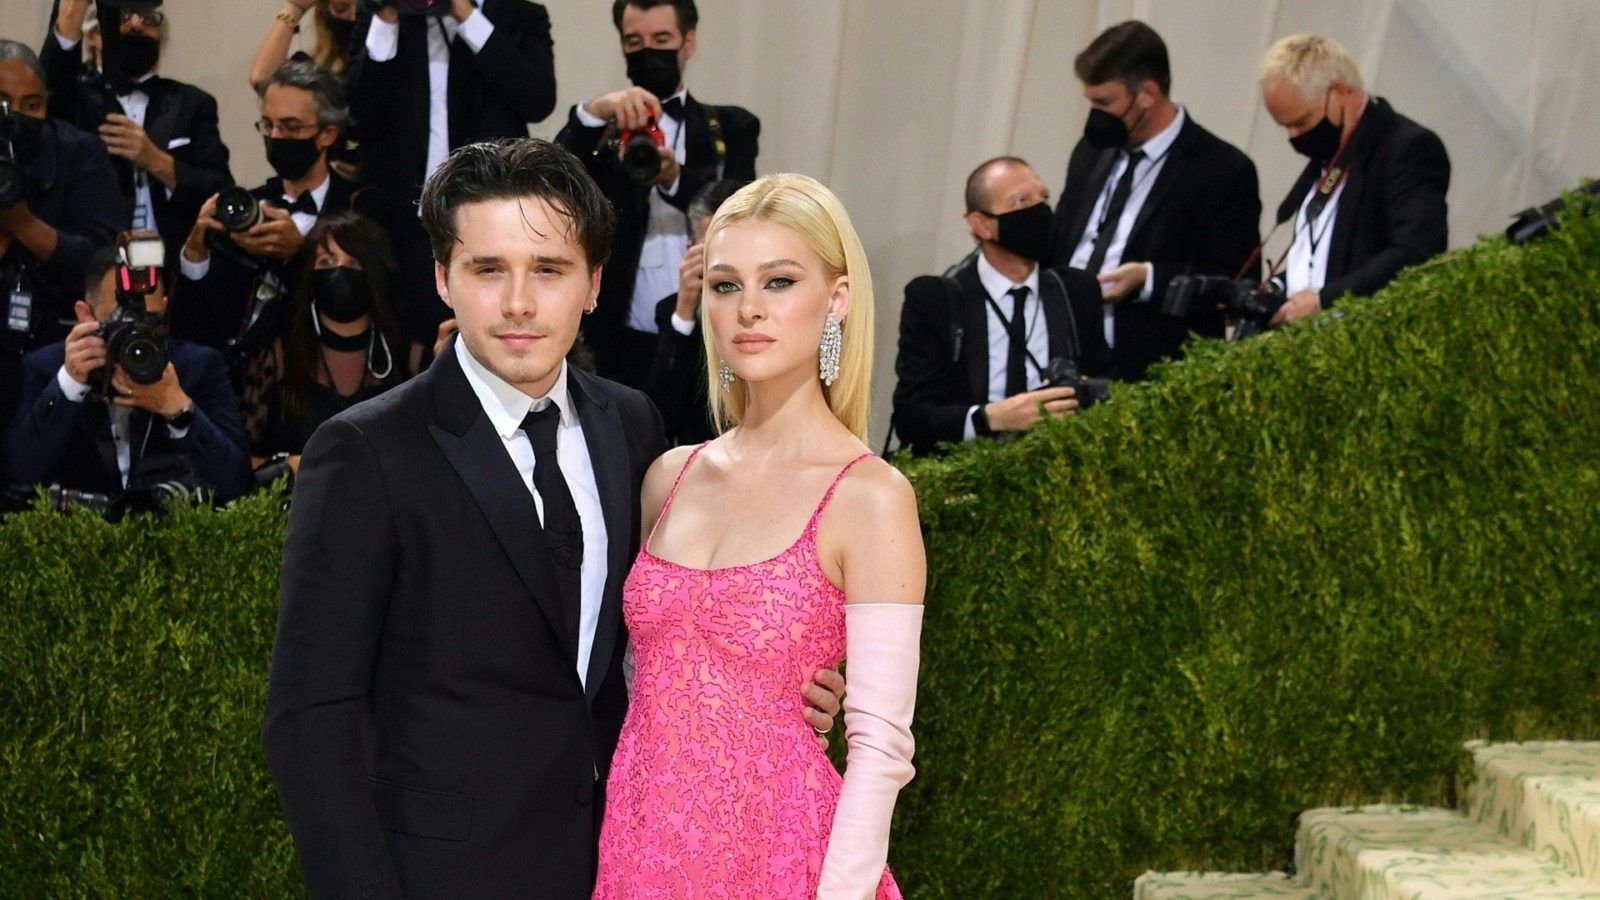 All the details on Nicola Peltz and Brooklyn Beckham’s wedding ceremony